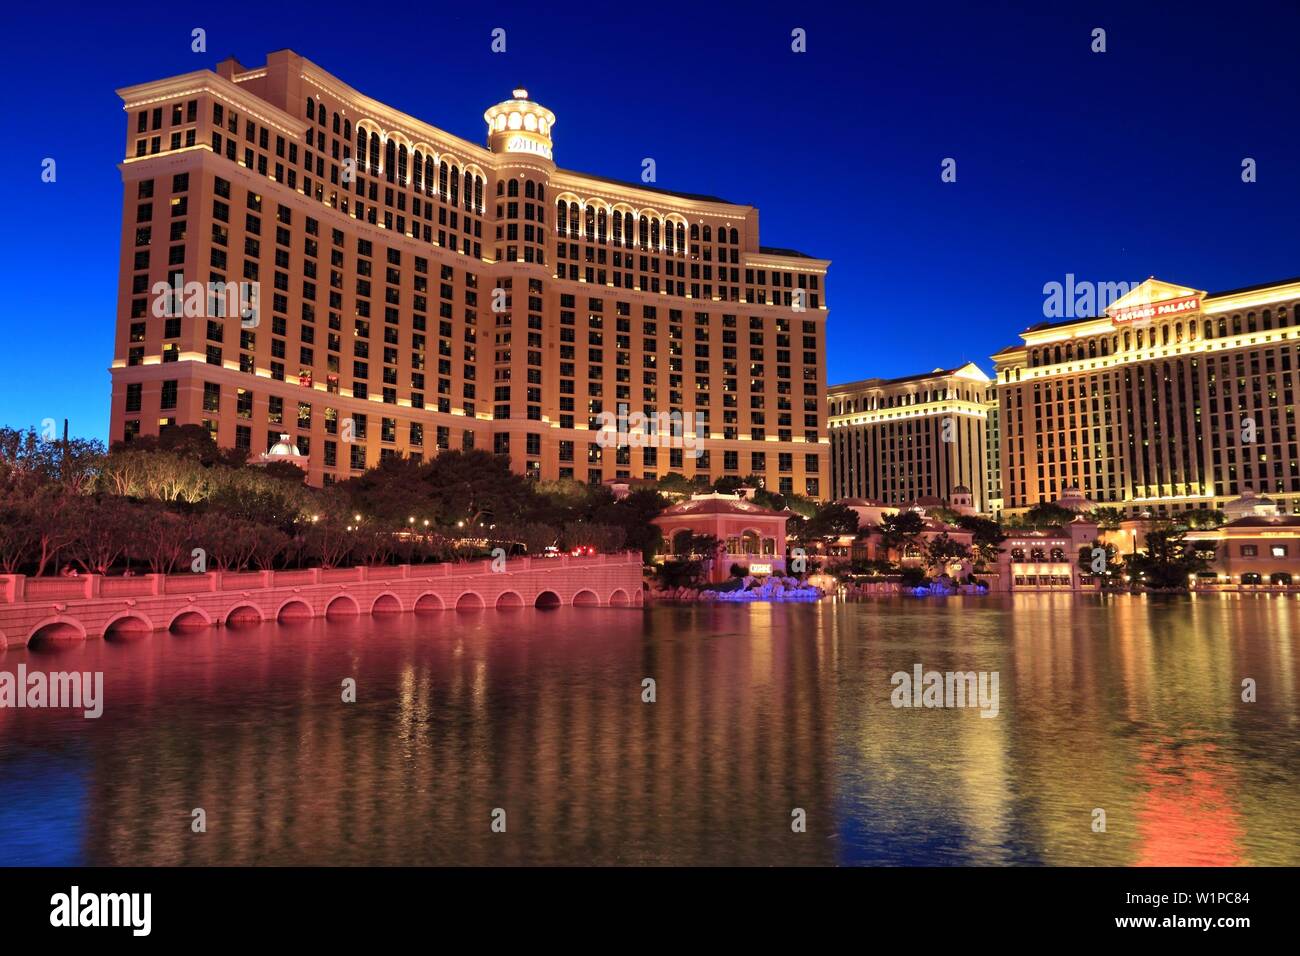 LAS VEGAS, USA - APRIL 14, 2014: Bellagio and Caesars Palace view in Las Vegas. Both hotels are among 15 largest hotels in the world with 3,950 and 3, Stock Photo